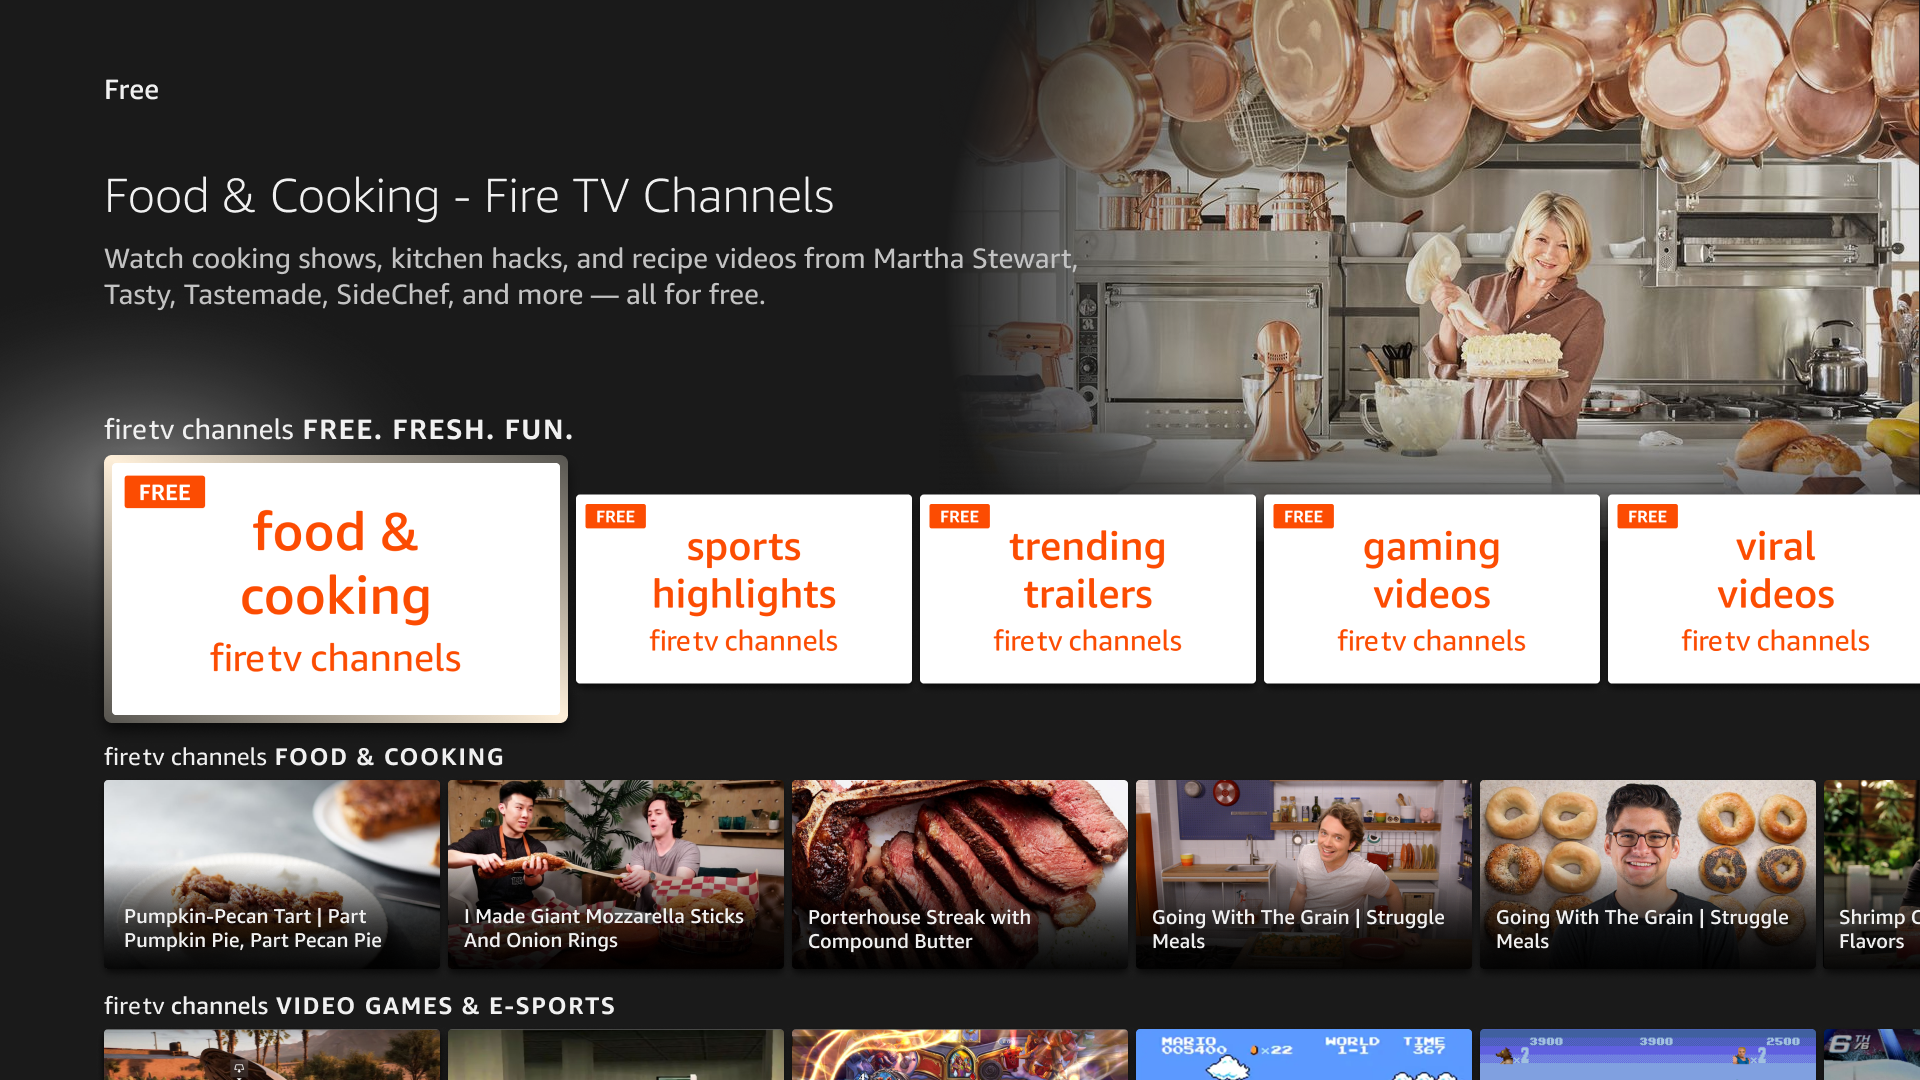 Amazon Fire TV Channels brings even more free TV to the platform Digital Trends